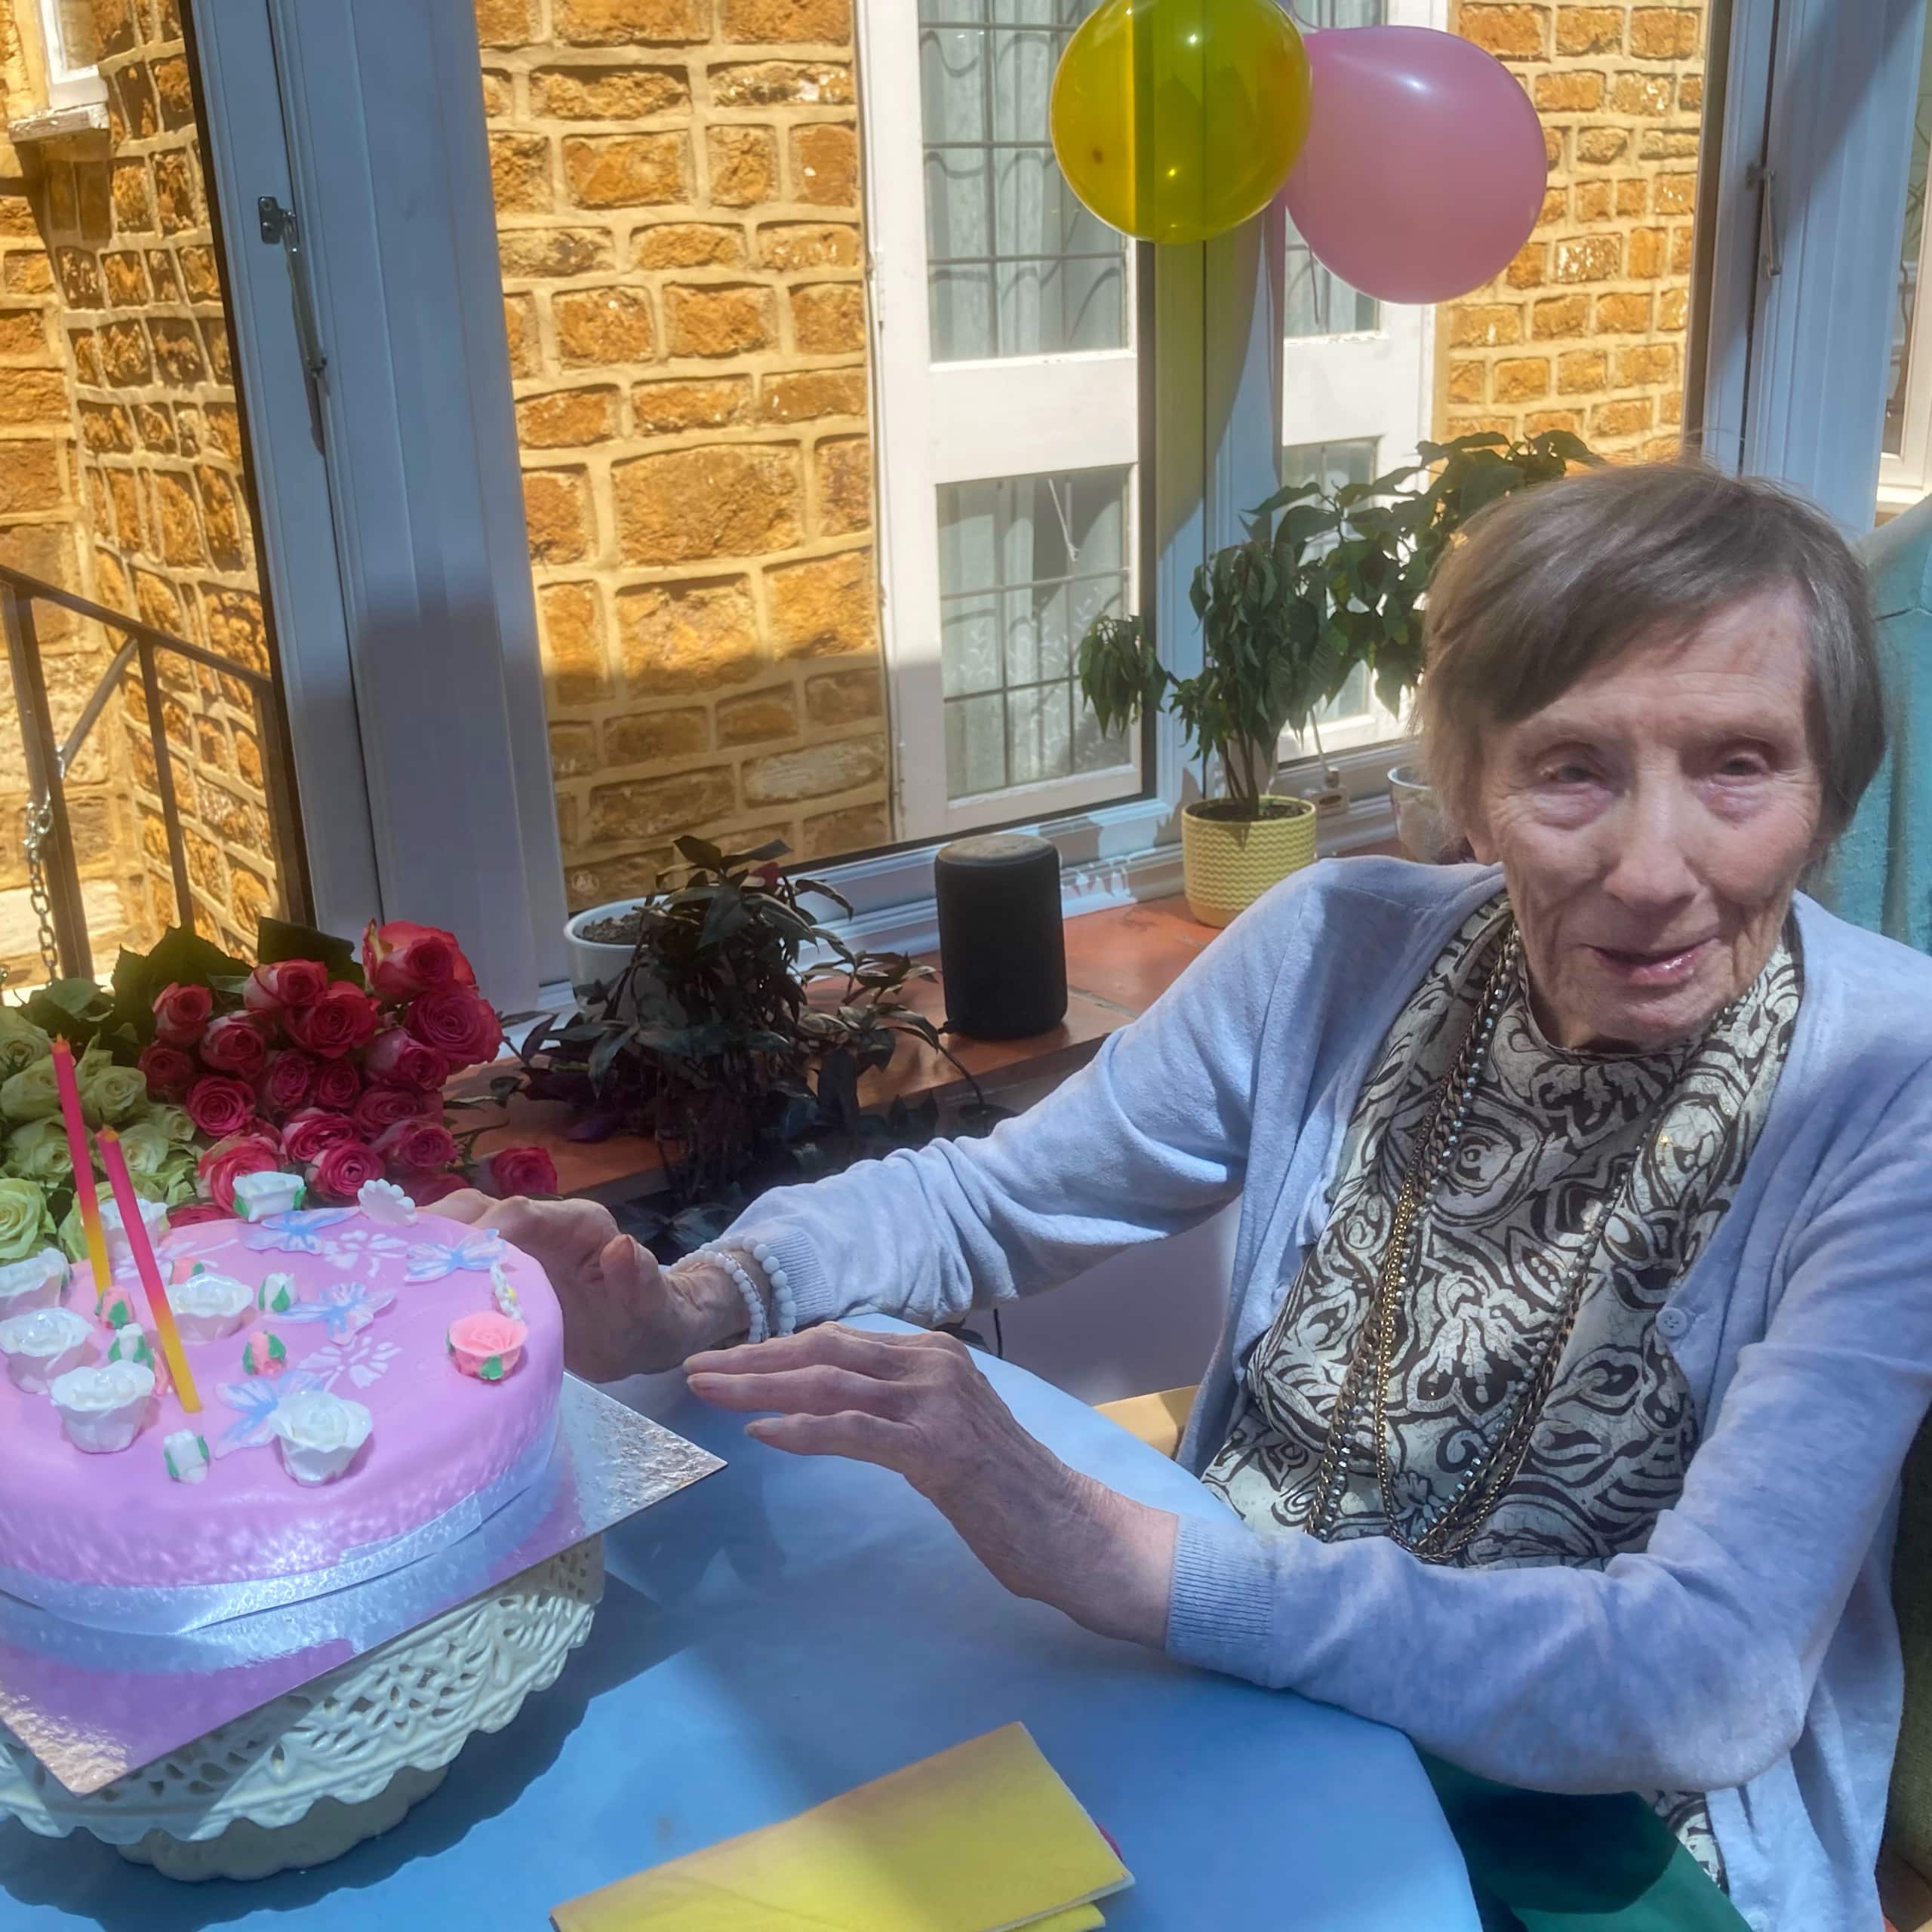 Deddington care home resident Joan Hearmon celebrates her 101st birthday at Featherton House with 101 roses and a floral-designed birthday cake.